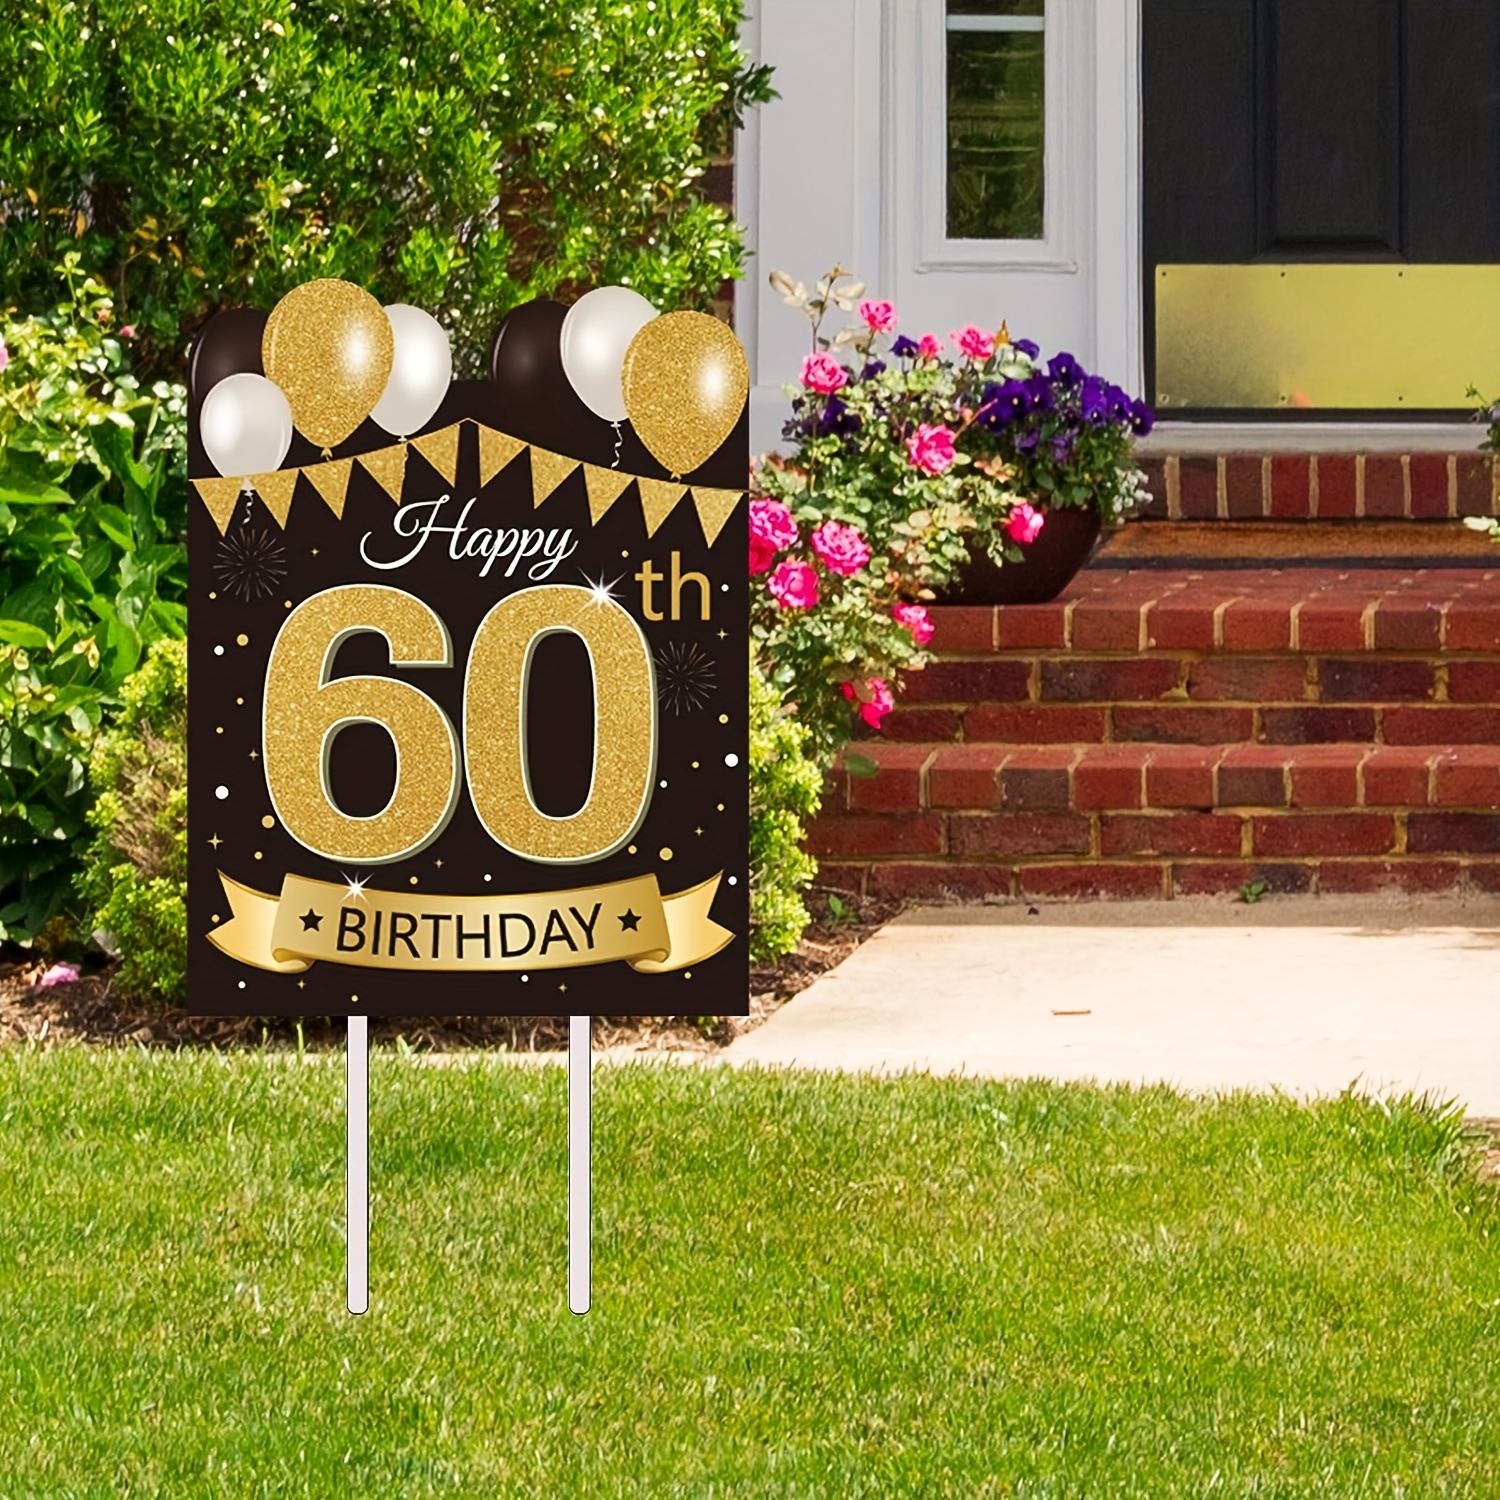 60th Wedding Anniversary Decorations, Black Gold Happy 60th Anniversary Yard Banner and 18pcs 60th Happy Anniversary Balloons for 60th Wedding